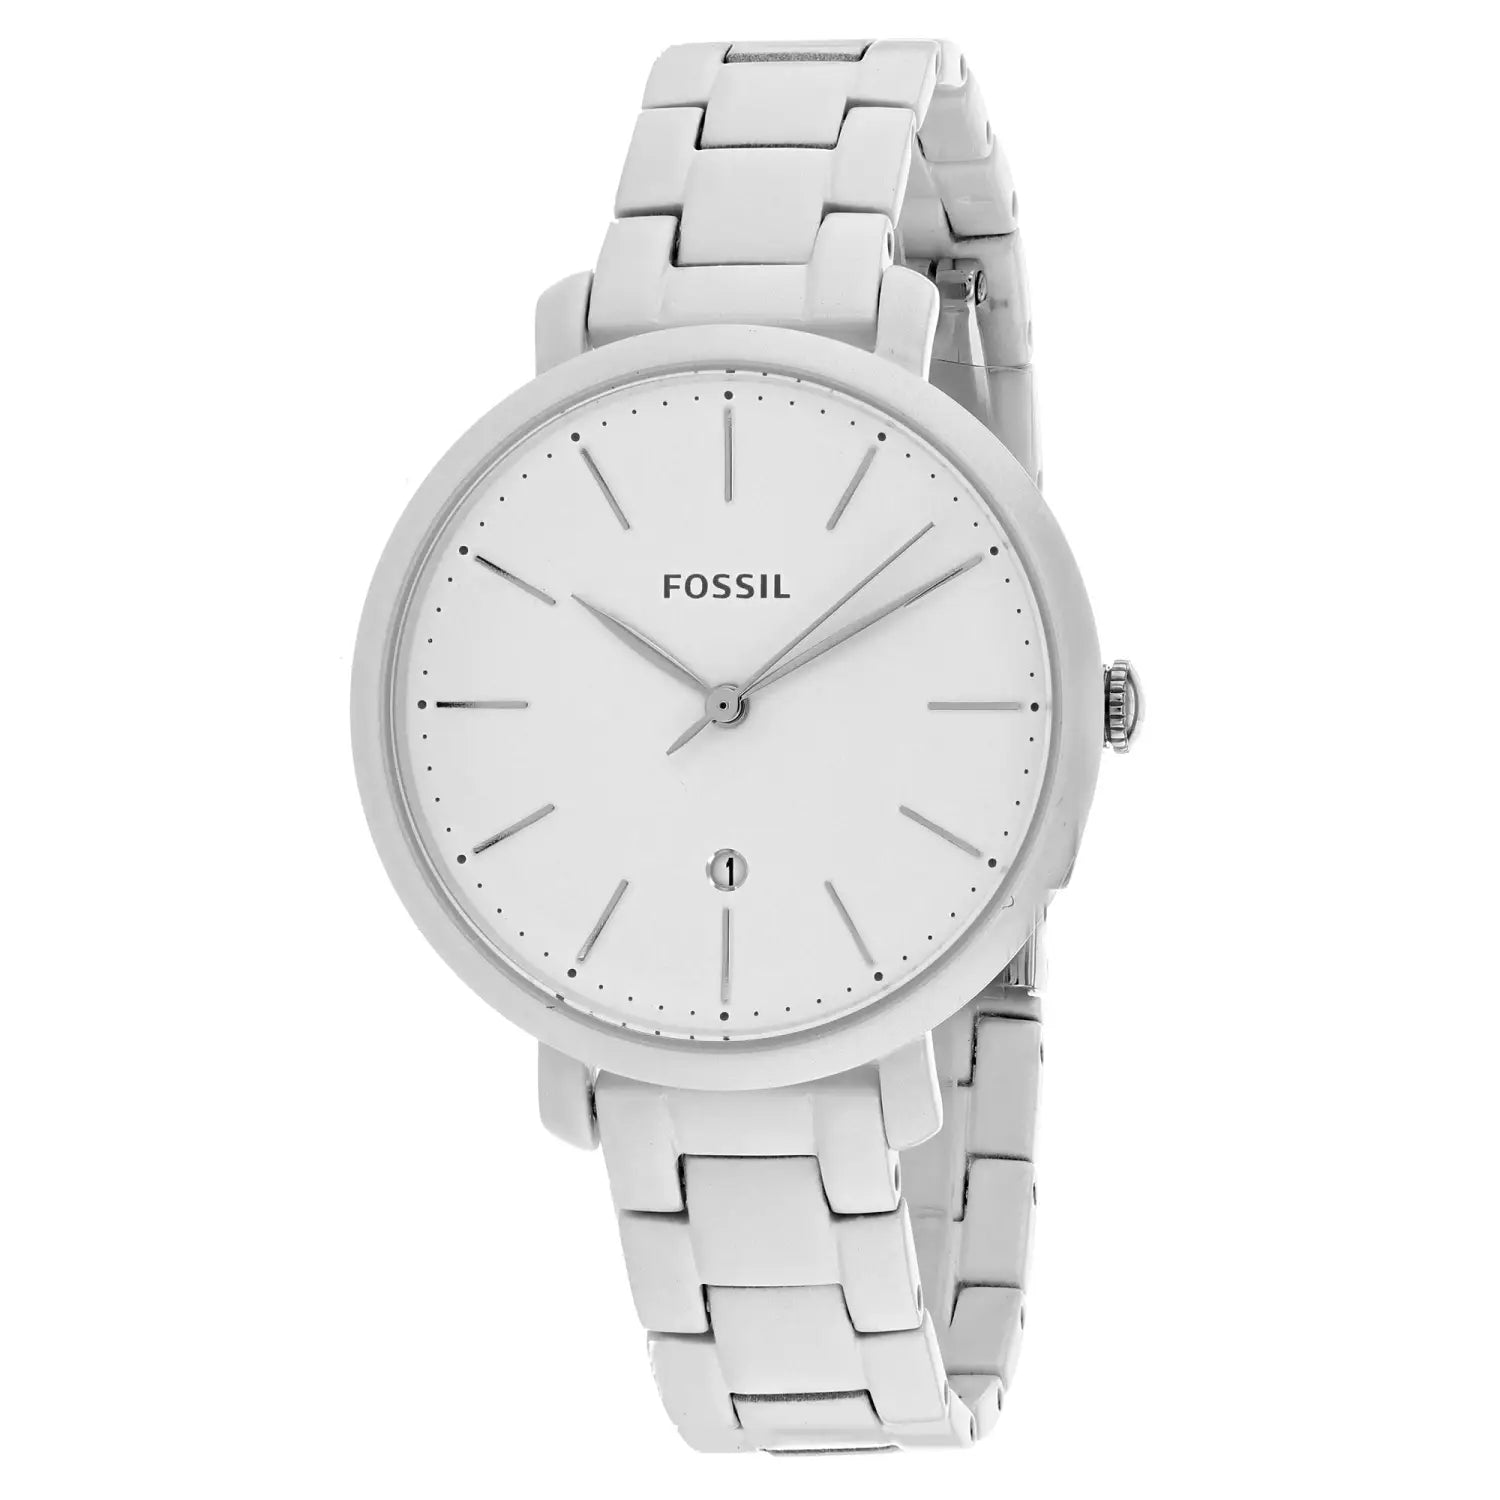 Fossil Women’s Jacqueline Stainless Steel Watch ES4397 -